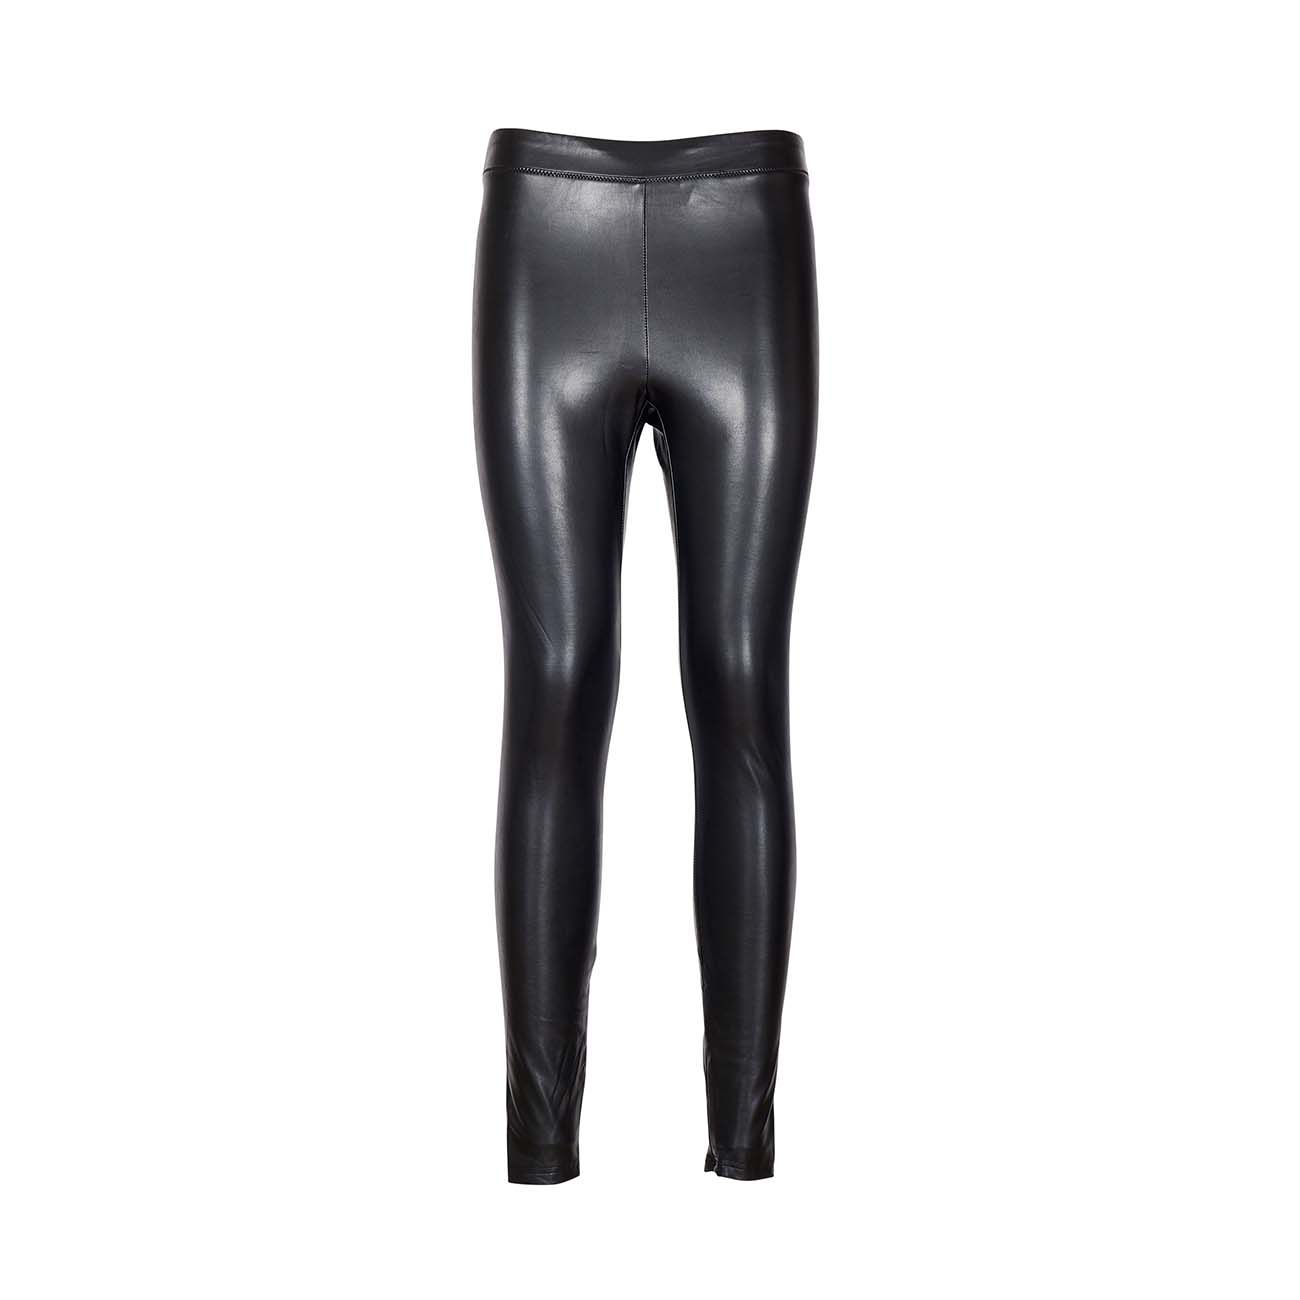 MICHAEL KORS STRETCH FAUX LEATHER LEGGINGS WITH ZIP Woman Black